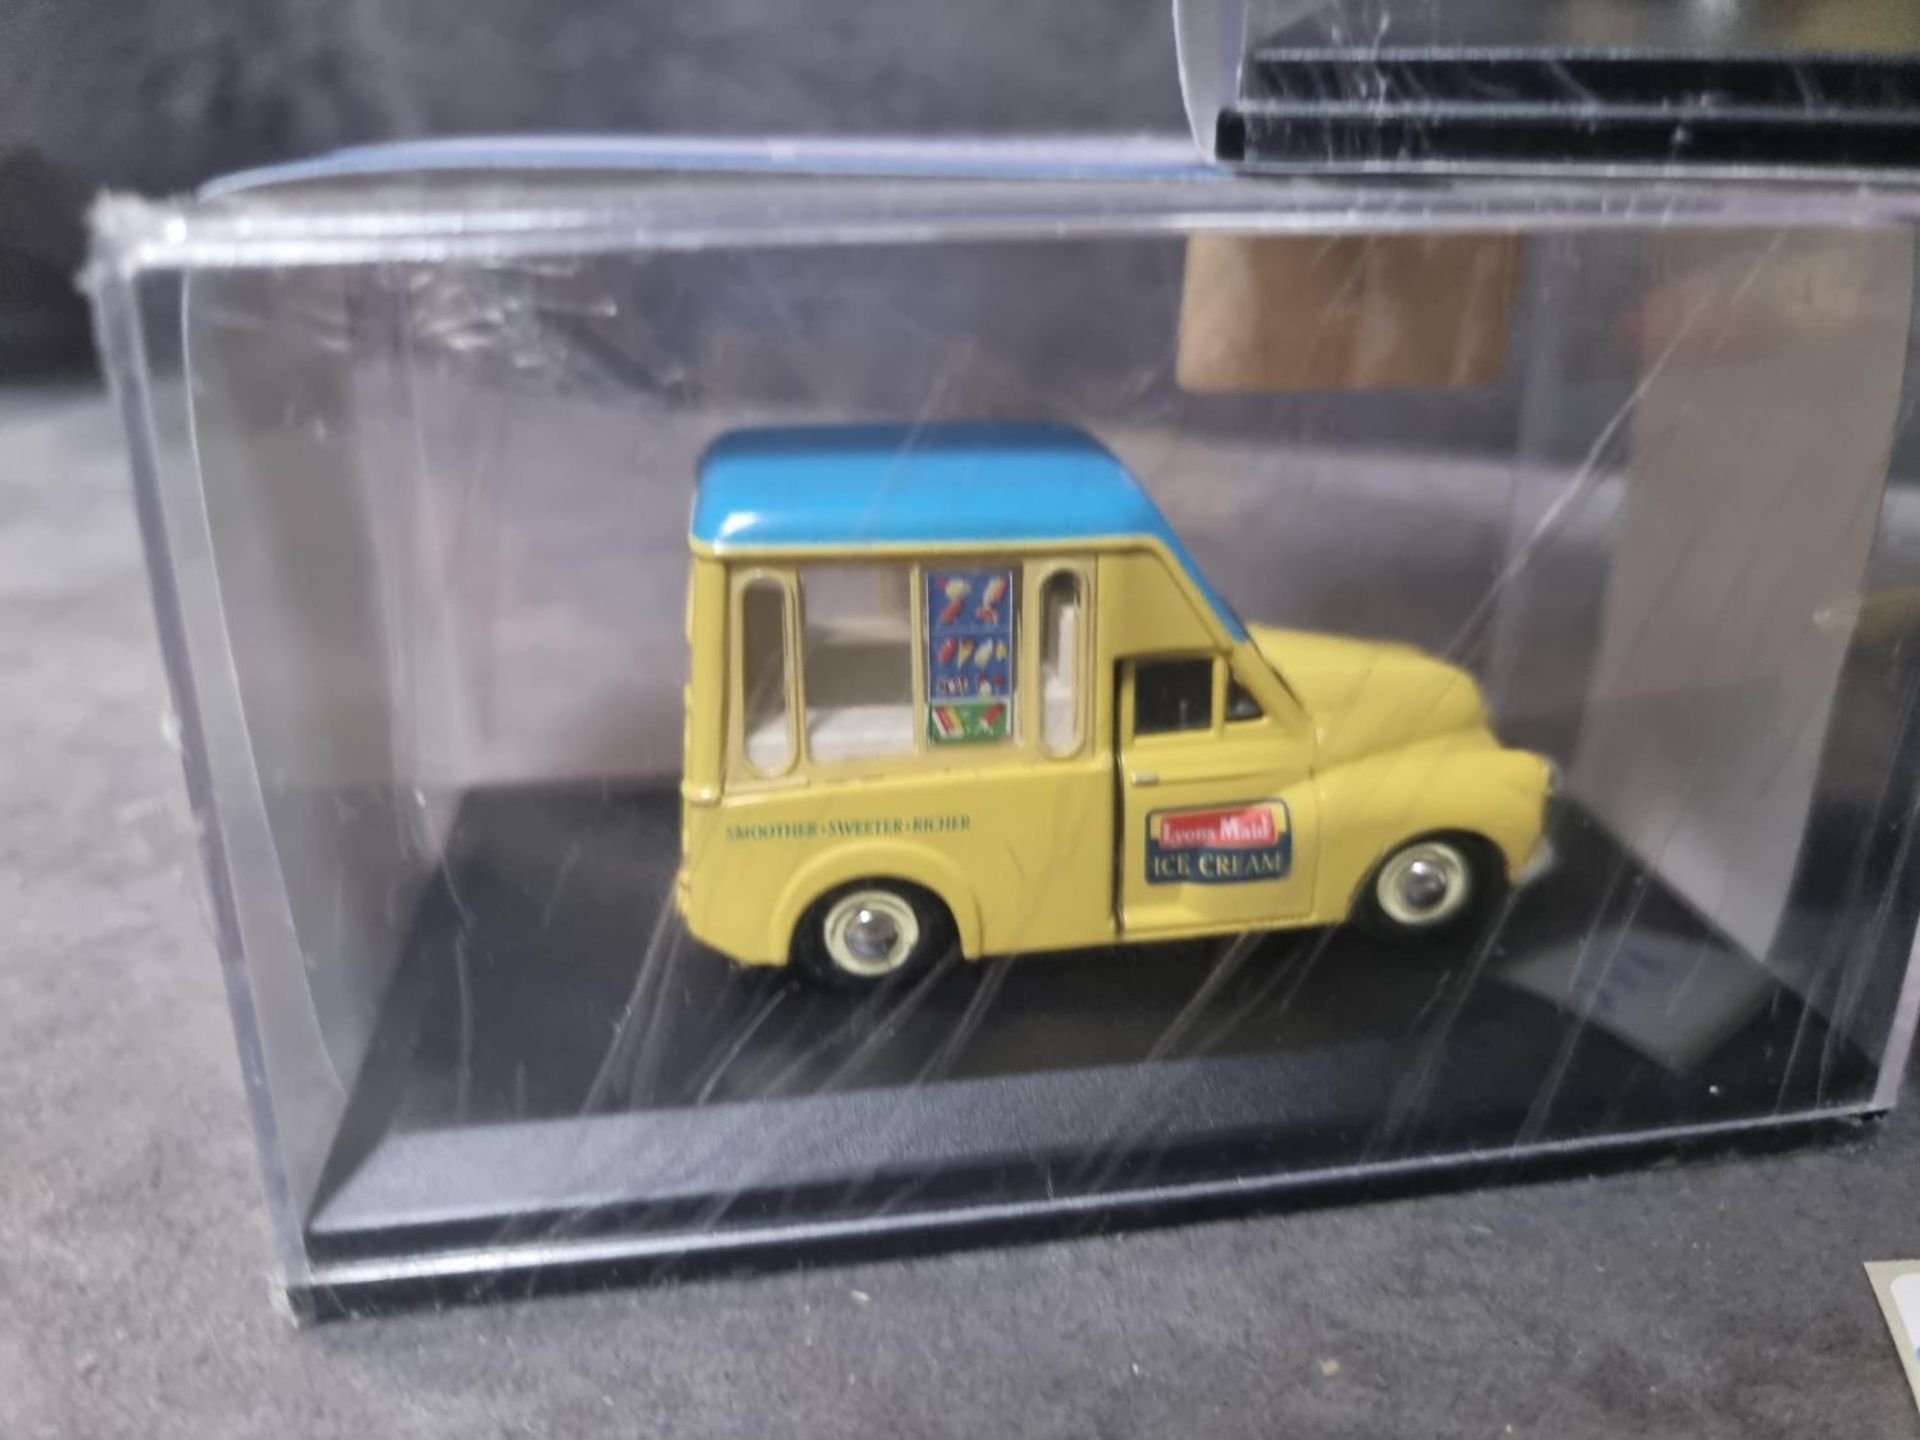 3x Oxford Road Show Diecast Models Comprising Of #Set28 Oxford Diecast Twin Lions Made Ice Cream - Image 2 of 4